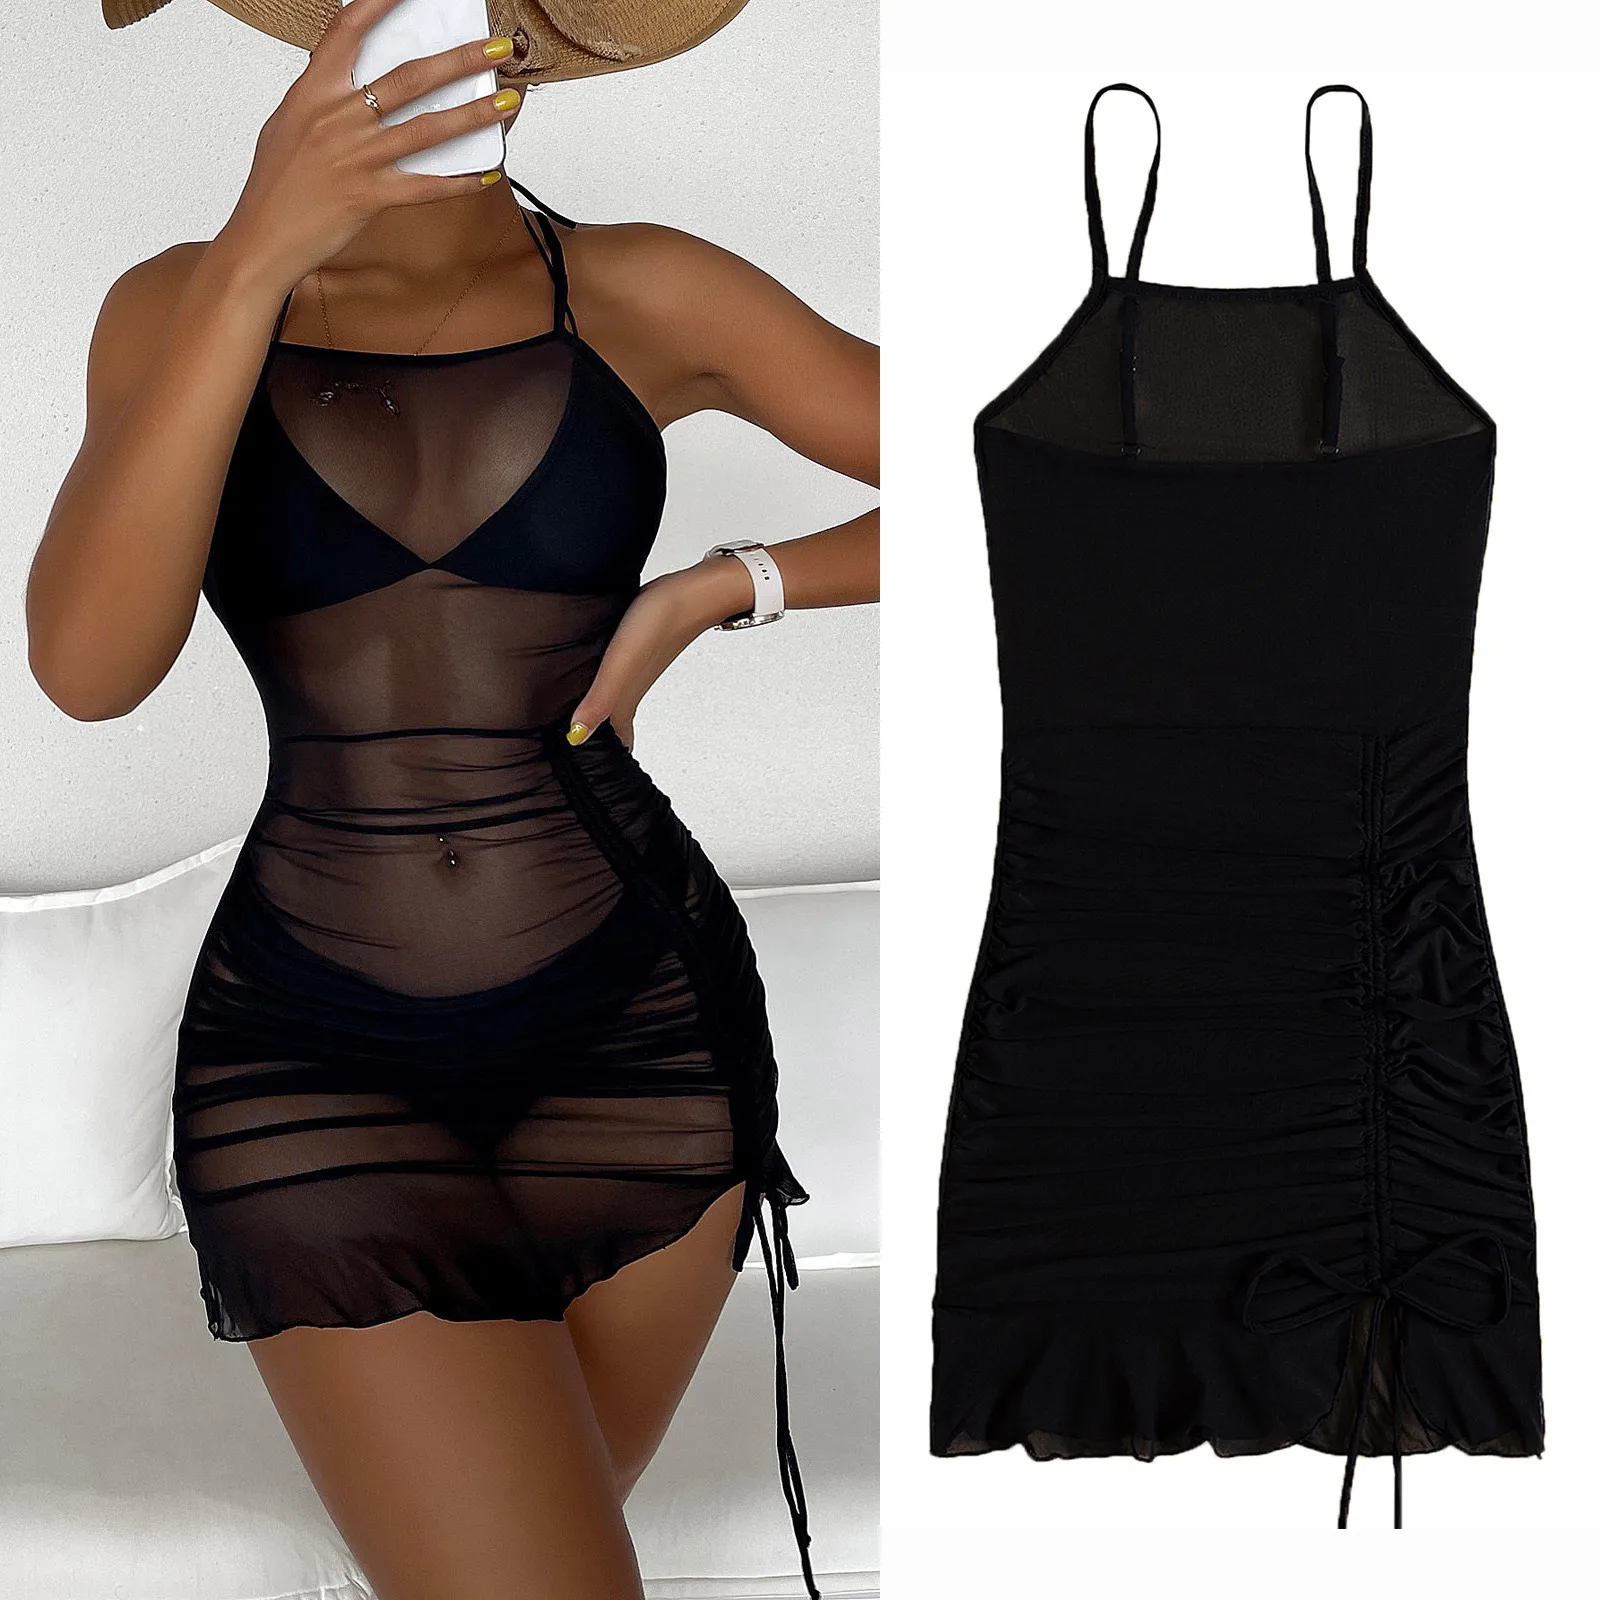 

2022 New Pom Sheer Chiffon Cover Up Women Sheer Mesh Cover Up Shorts Beach Cover Up Beach Wrap Bikini Wraps Solid Cover Up